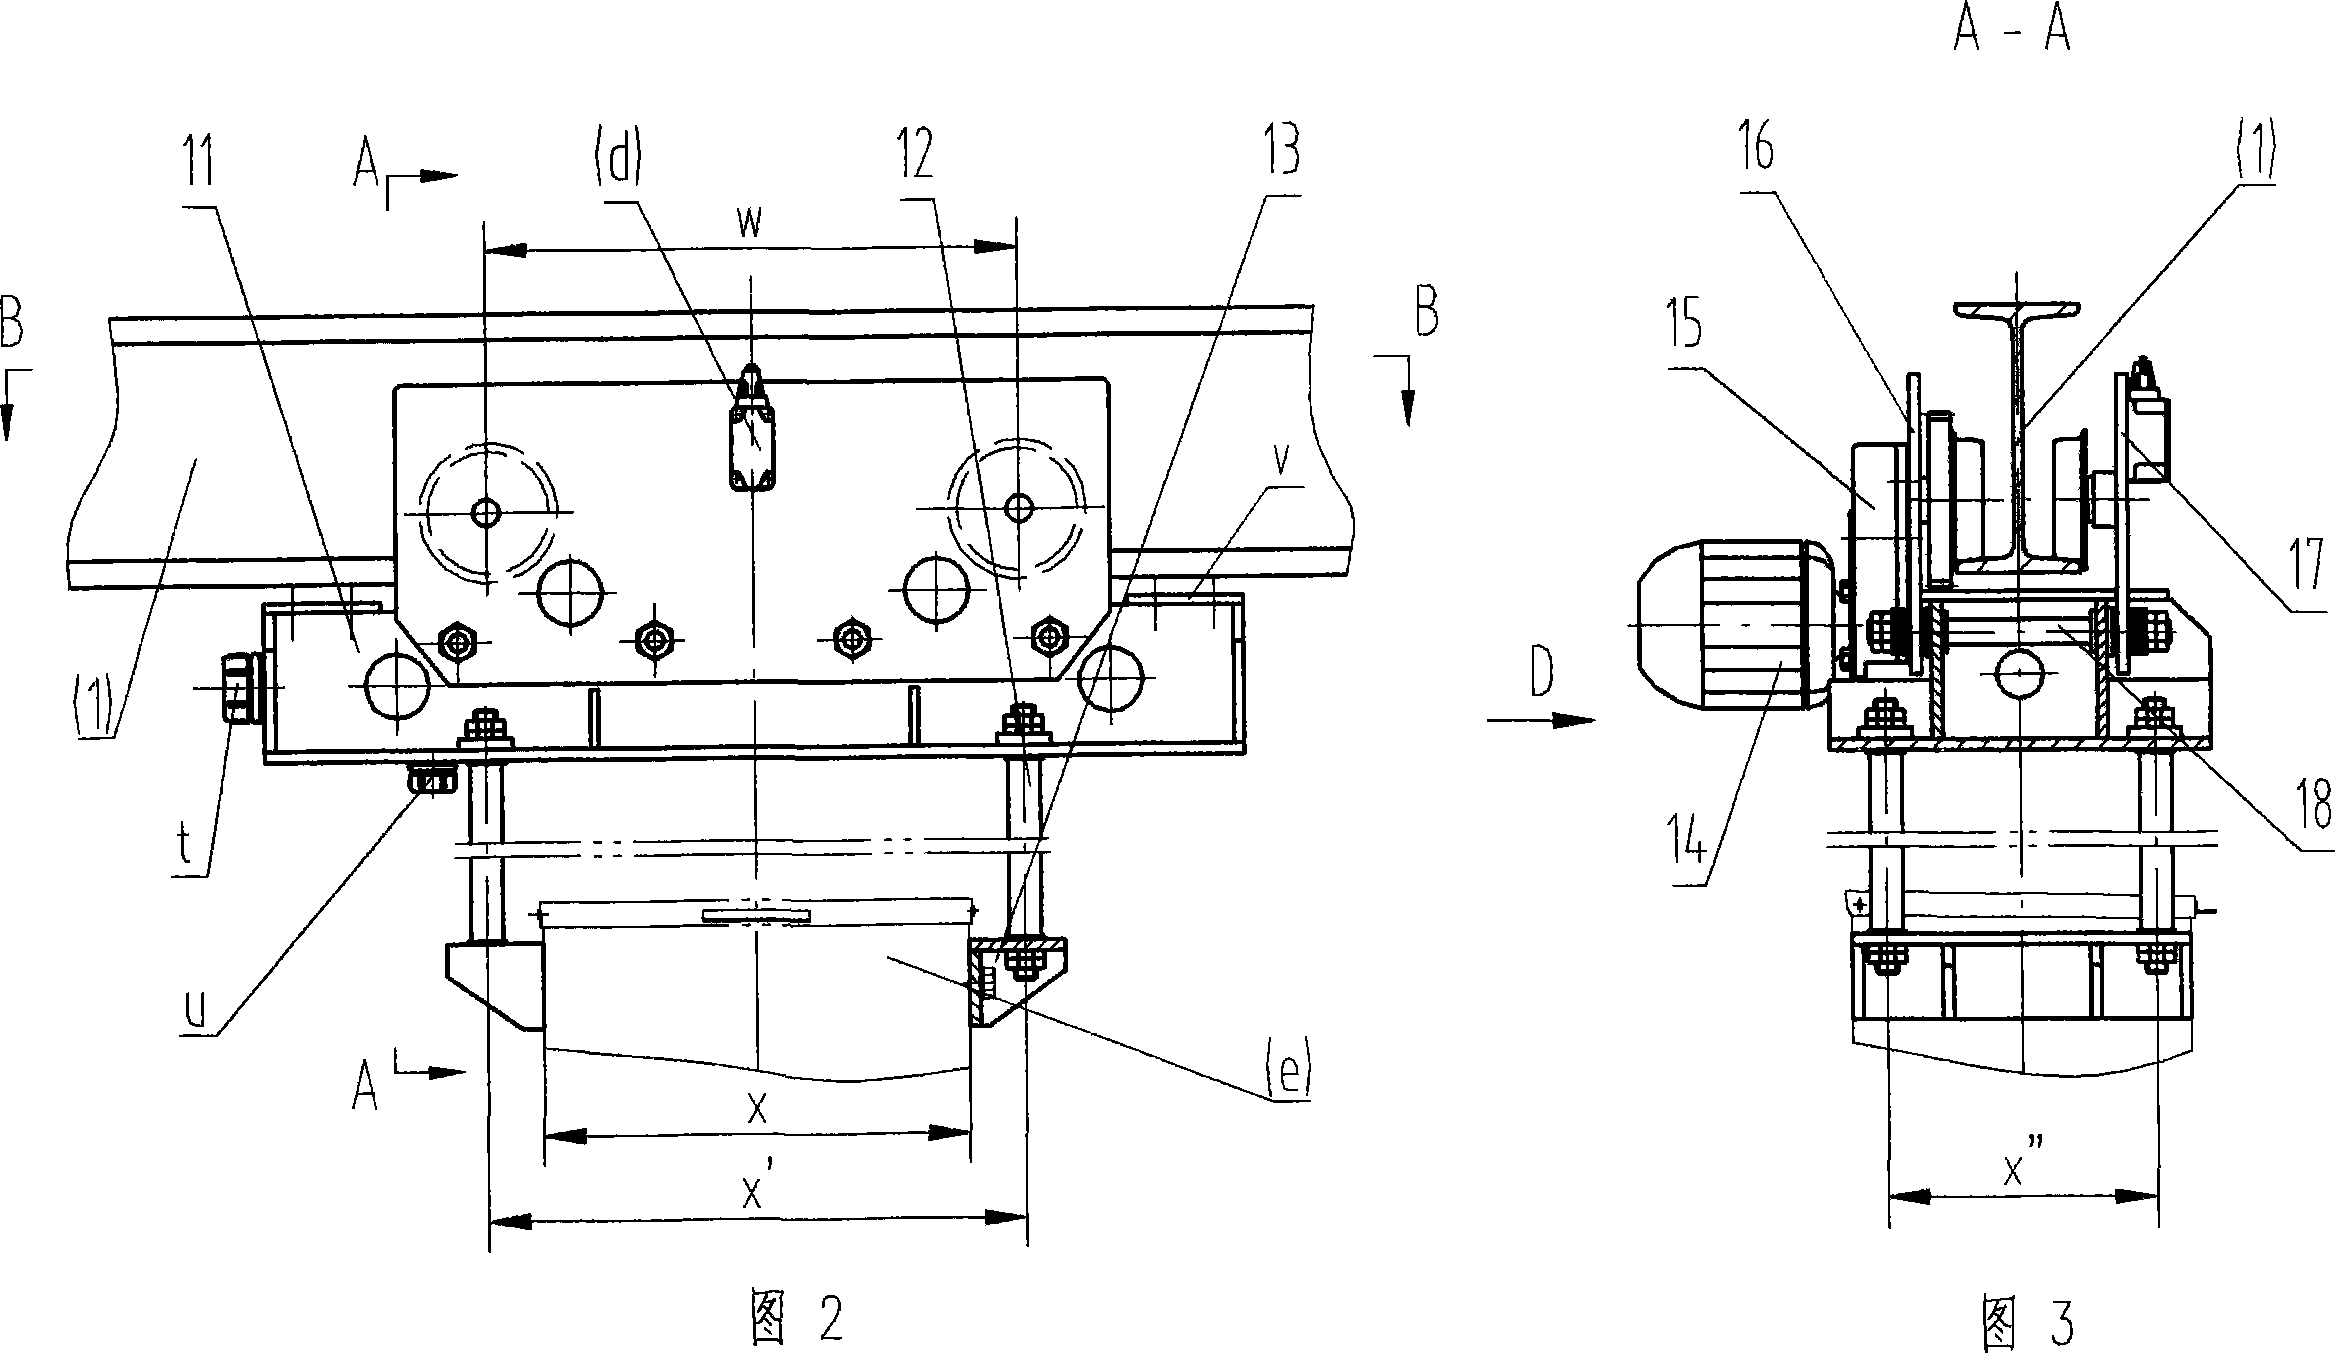 Program control operation mechanism for a hand dropping flow-following gestating device